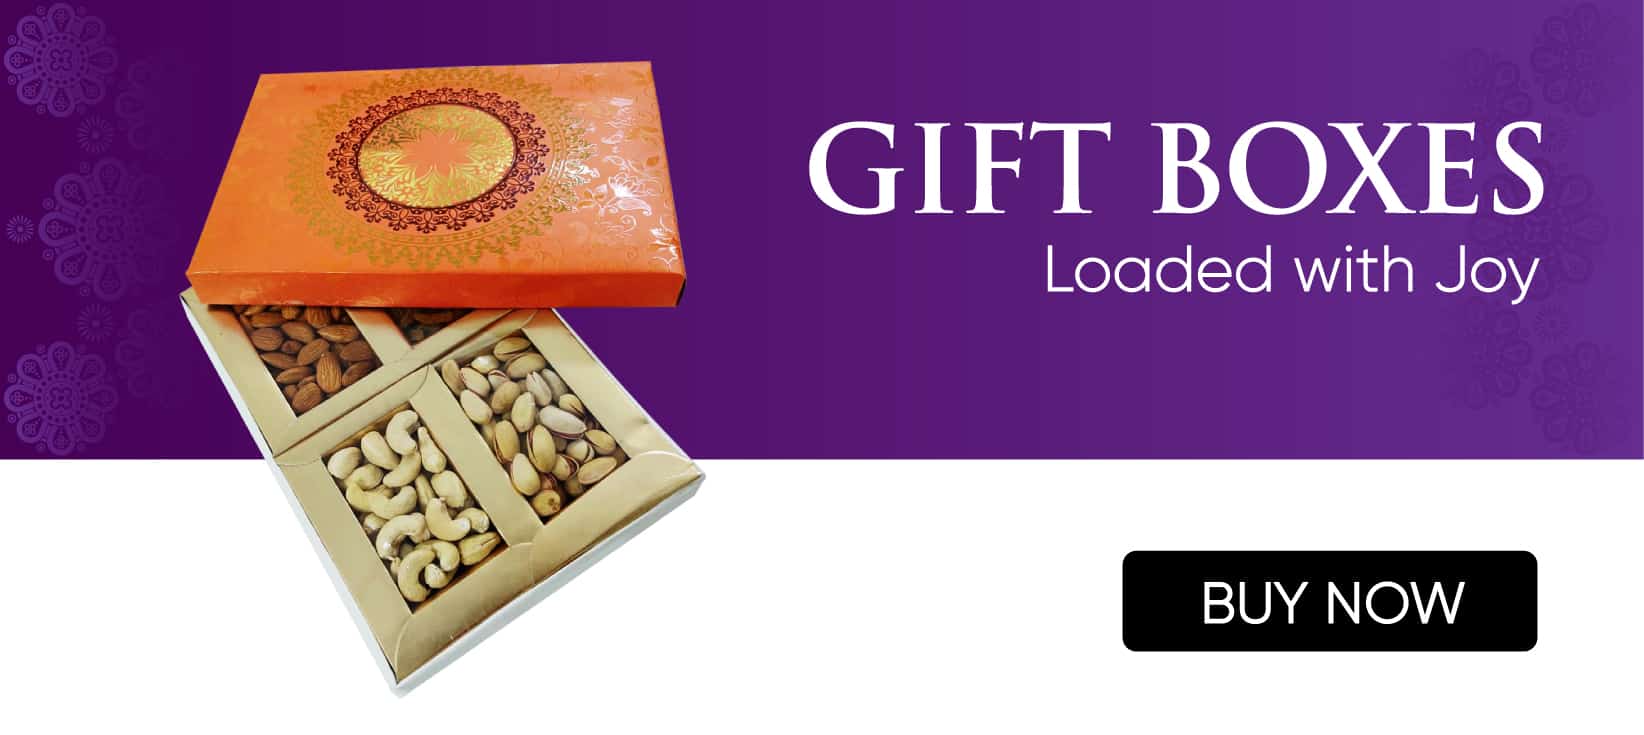 GIFT-BOXES